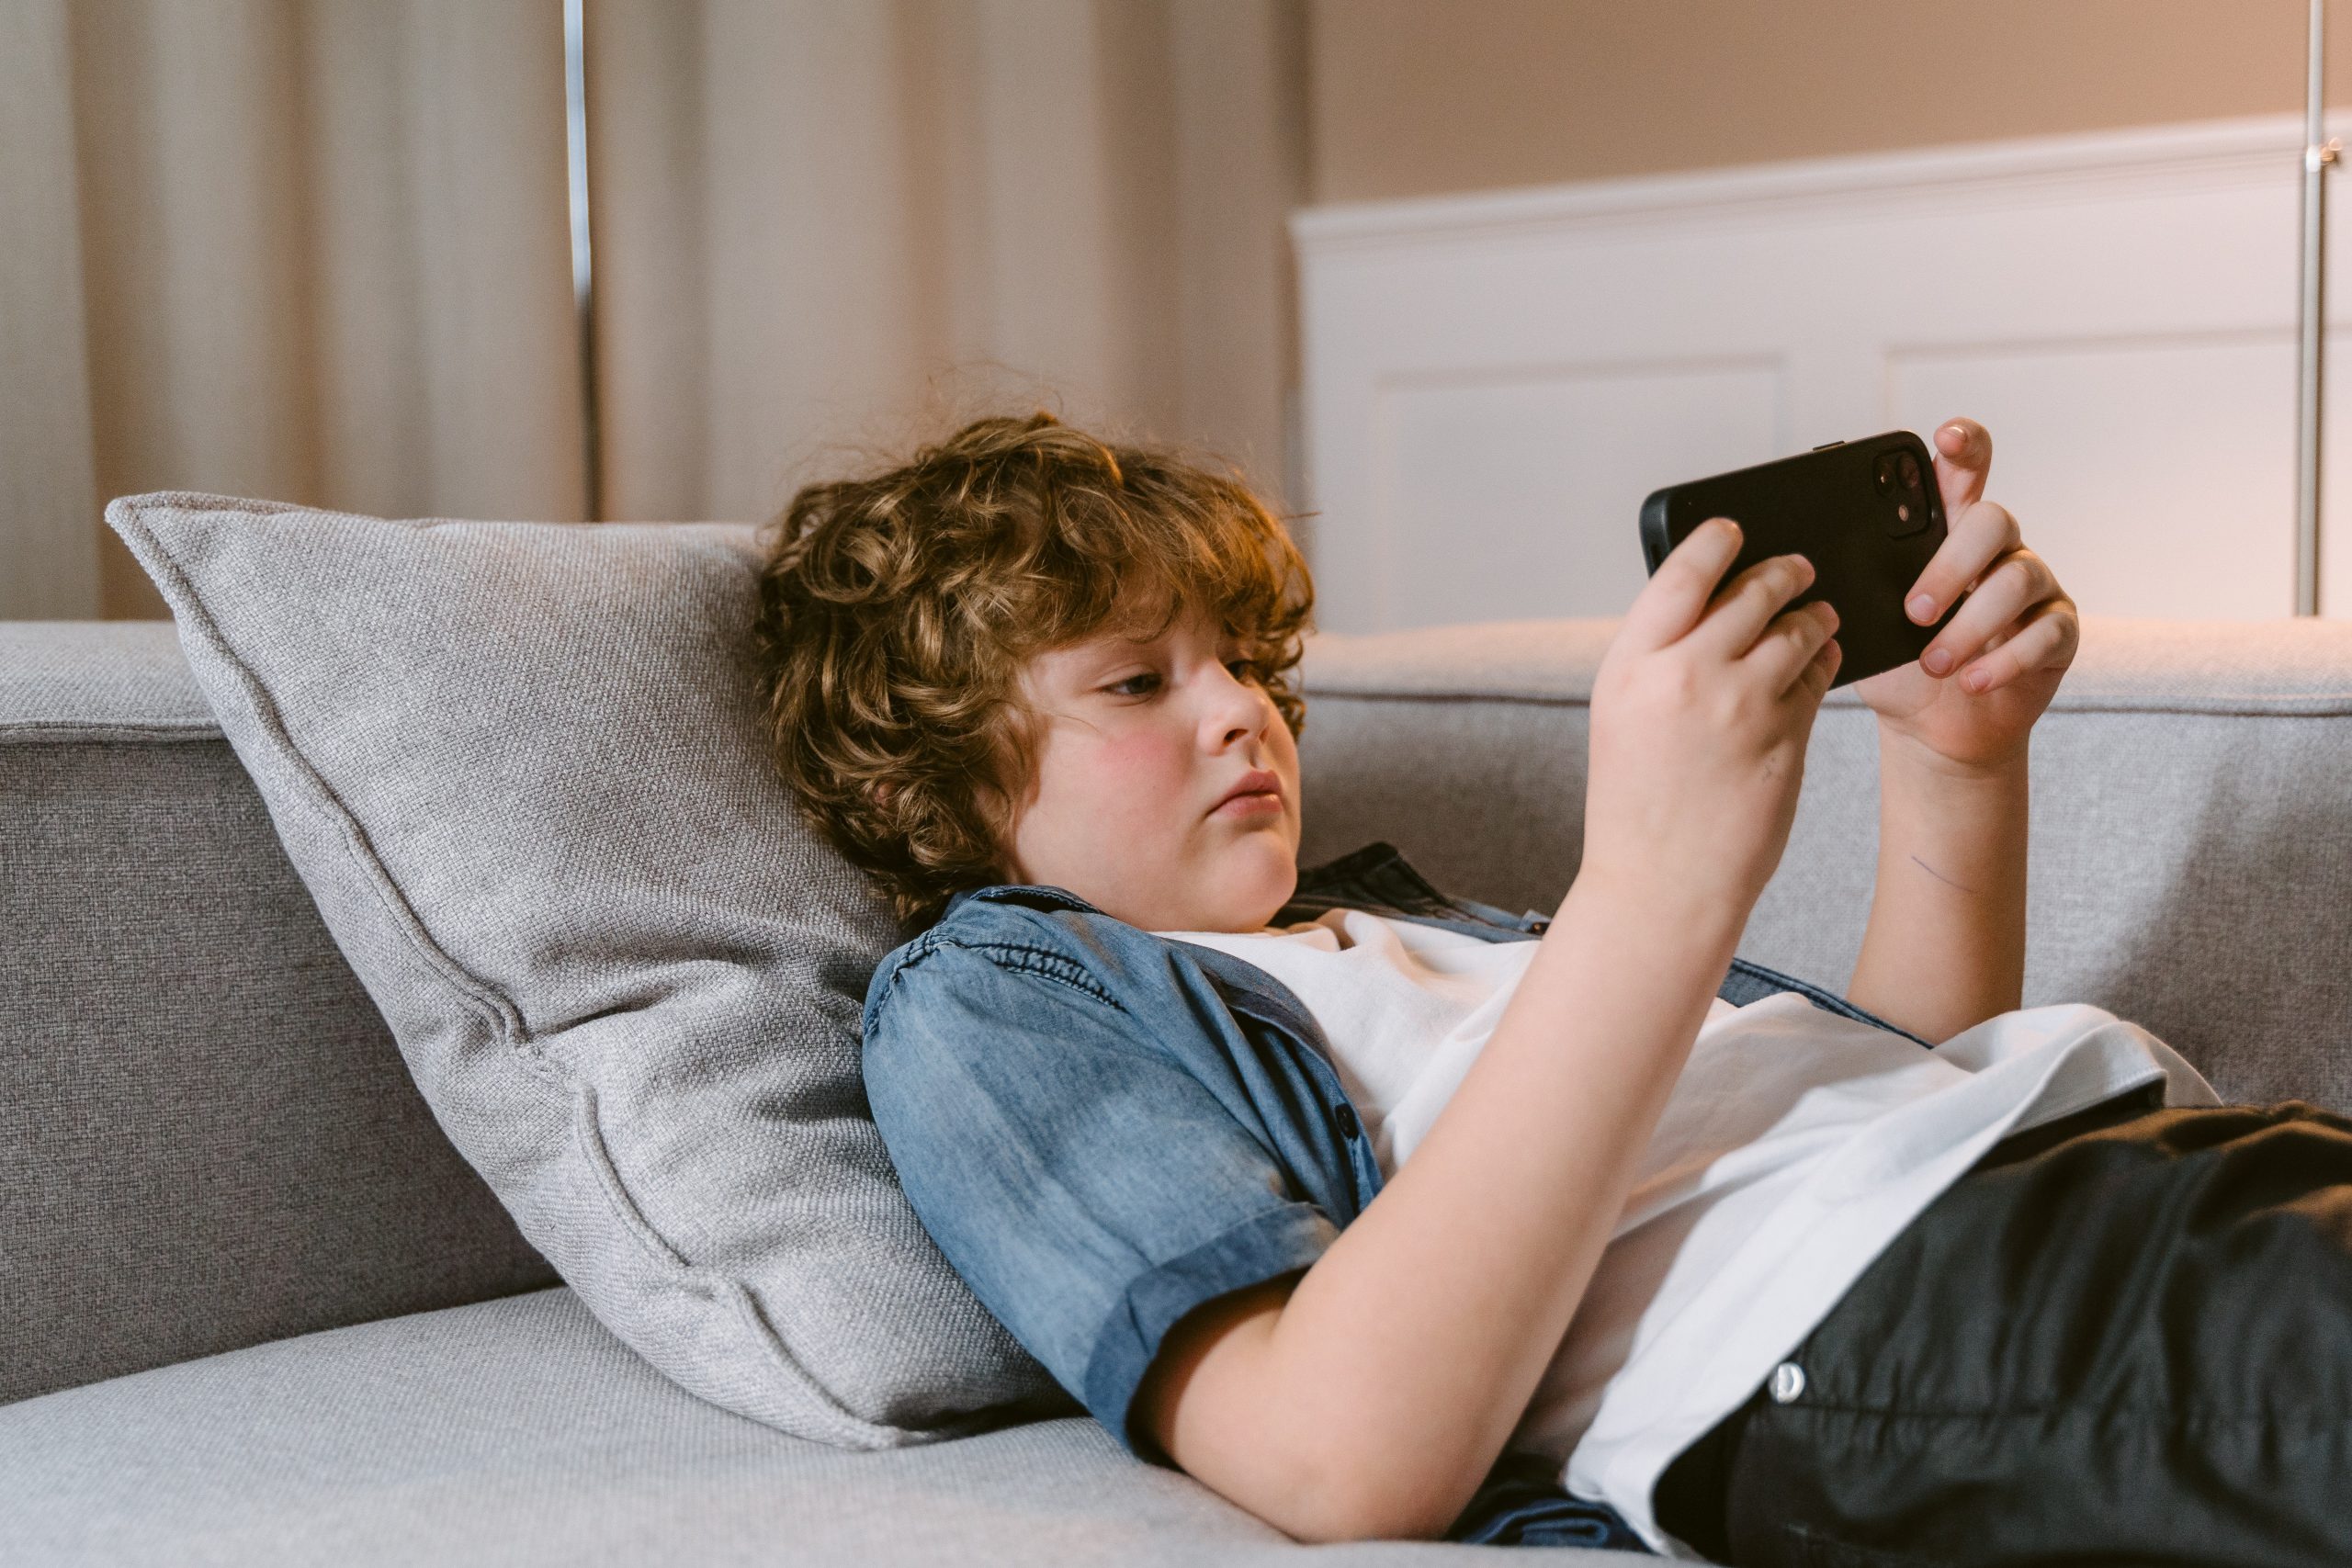 Young boy lying on couch looking at his phone.